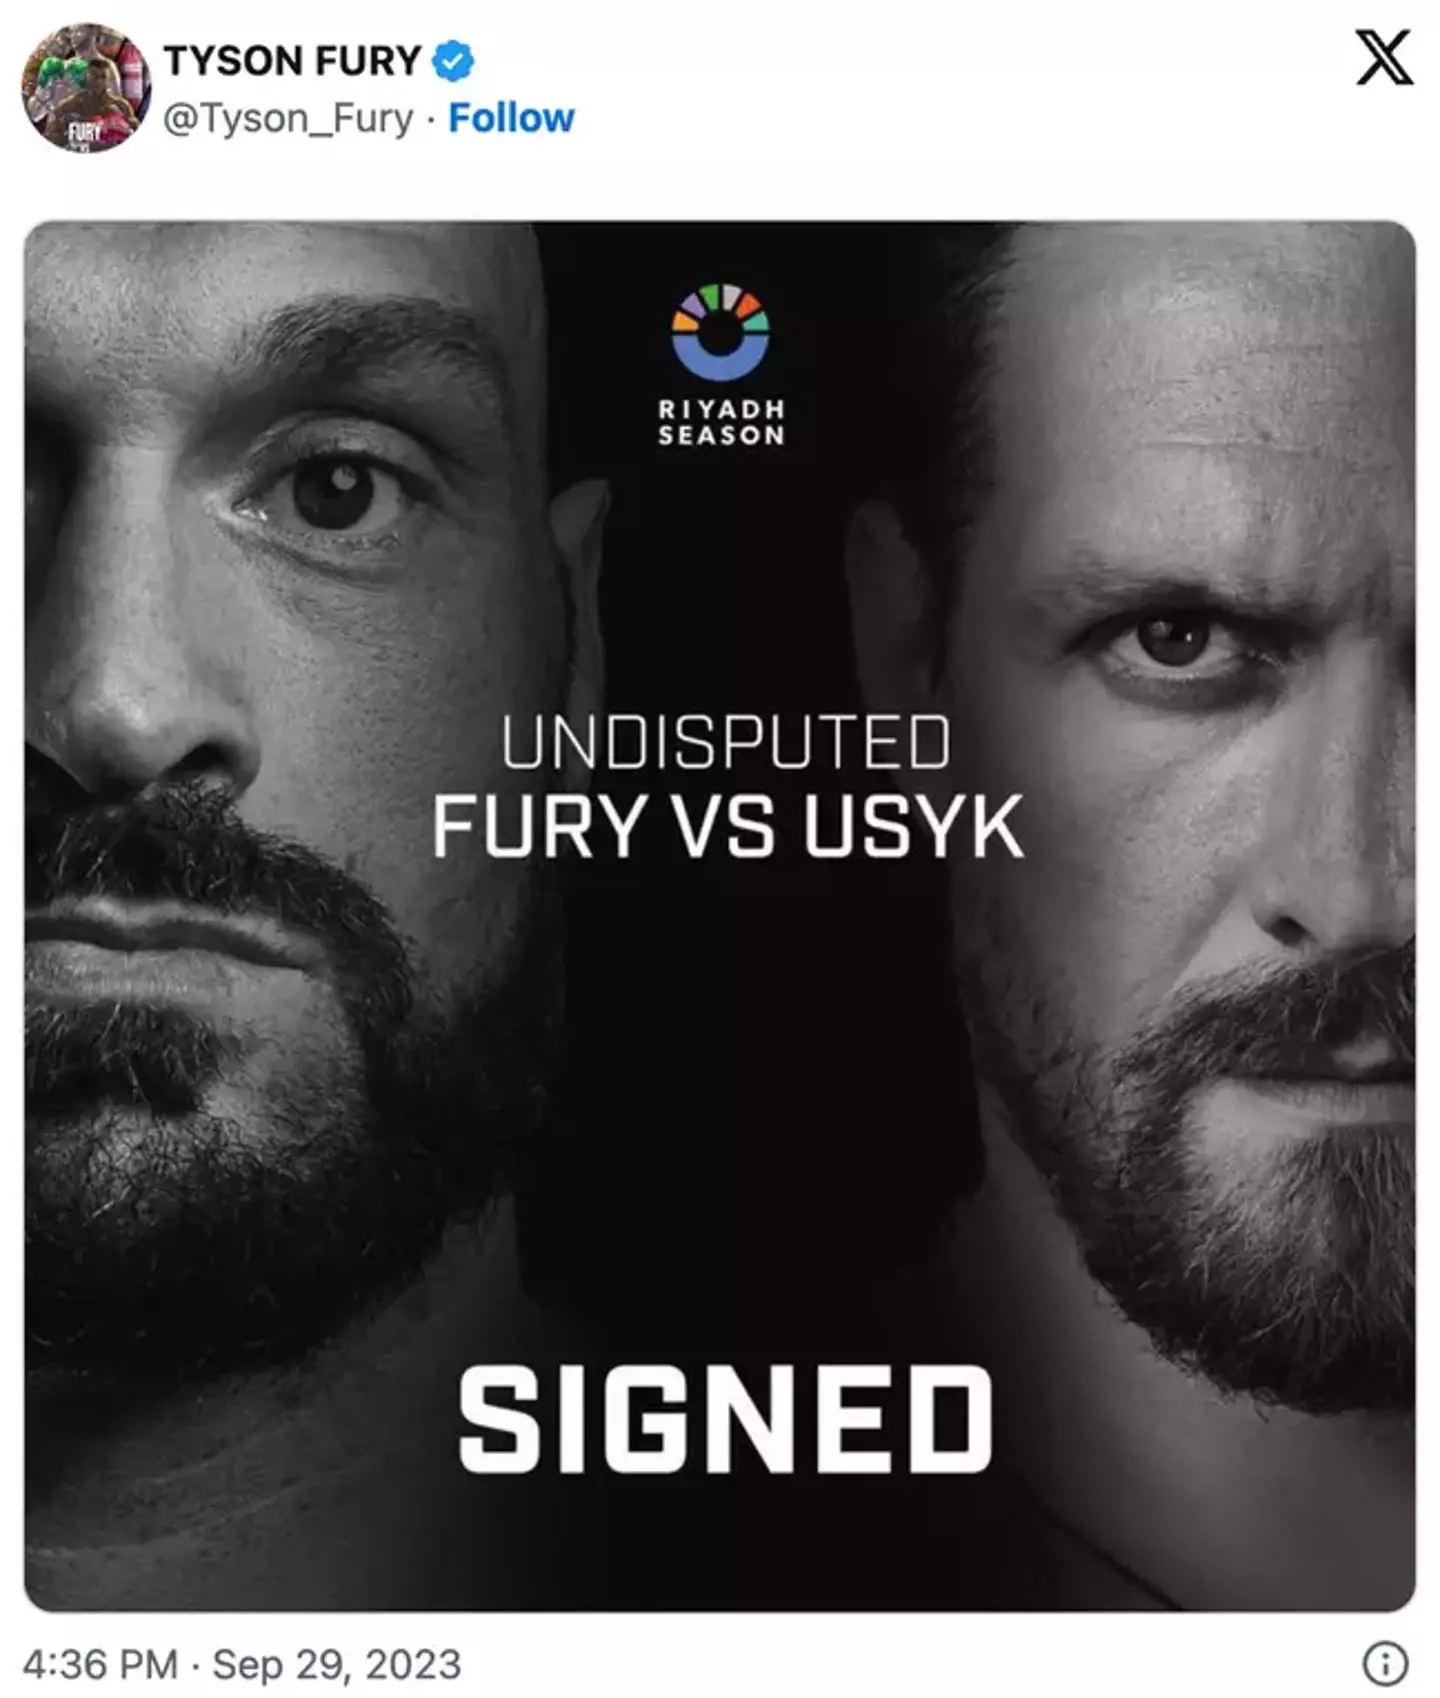 Tyson Fury has signed a deal to fight Oleksandr Usyk, and the purse is said to be substantial.